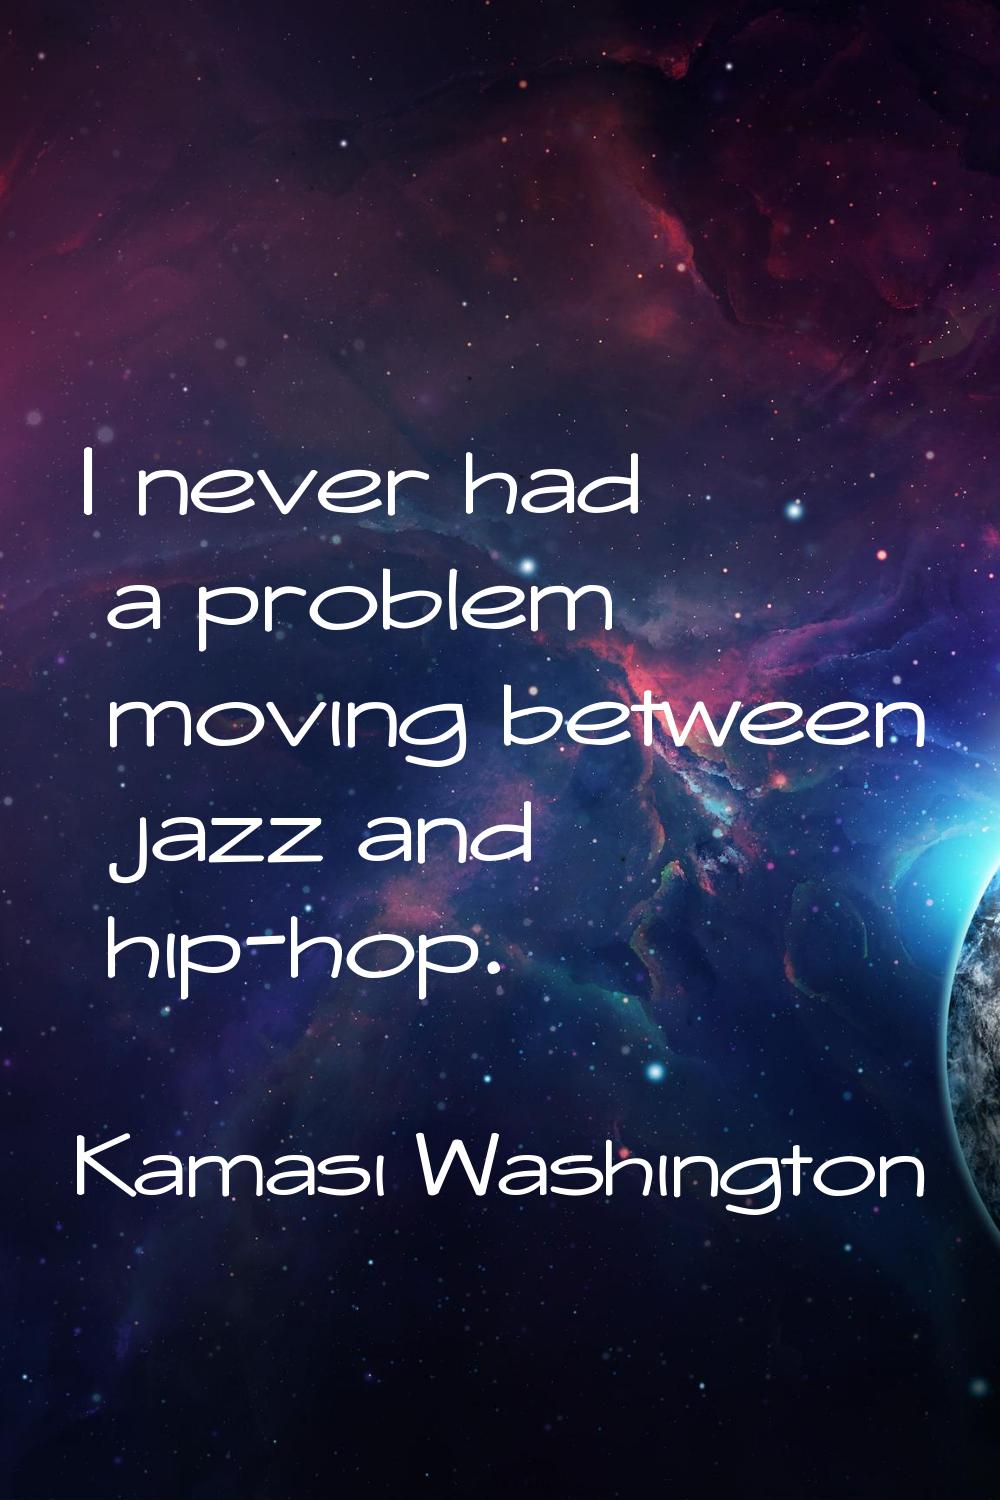 I never had a problem moving between jazz and hip-hop.